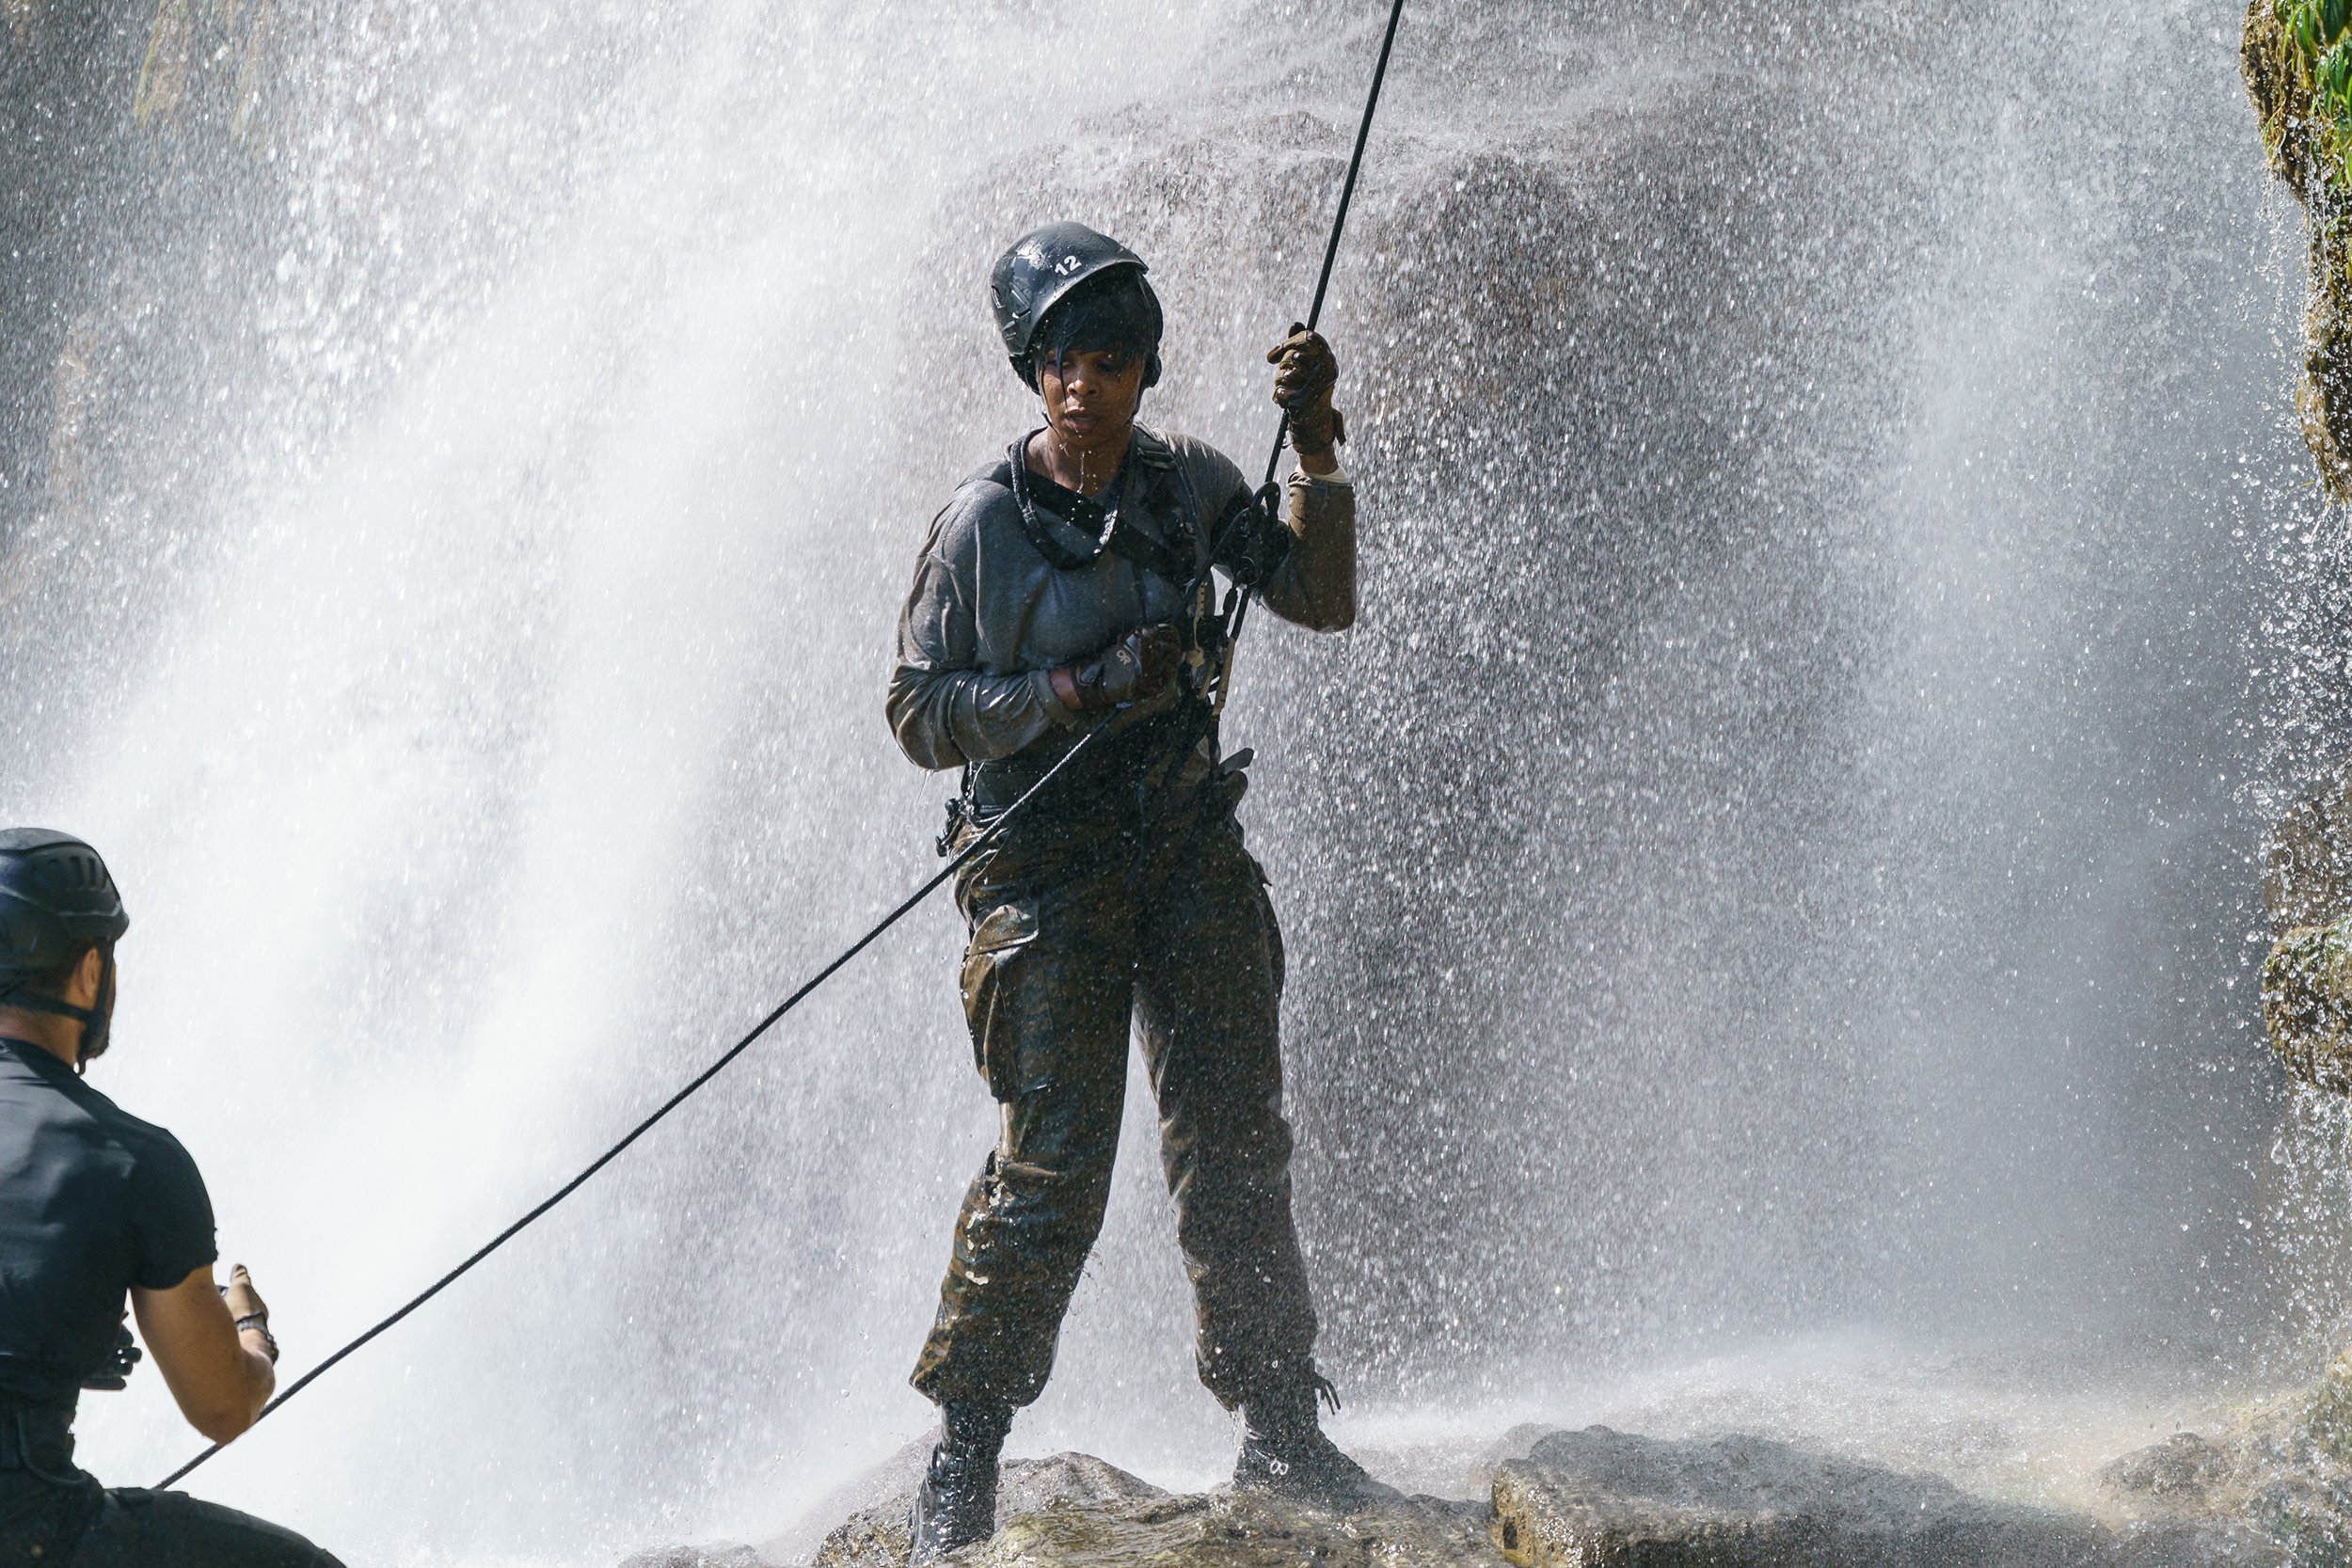  Recruit No 12: Aliyah - Waterfall Abseil  Episode 2: Mindset  Minnow Films / Channel 4 